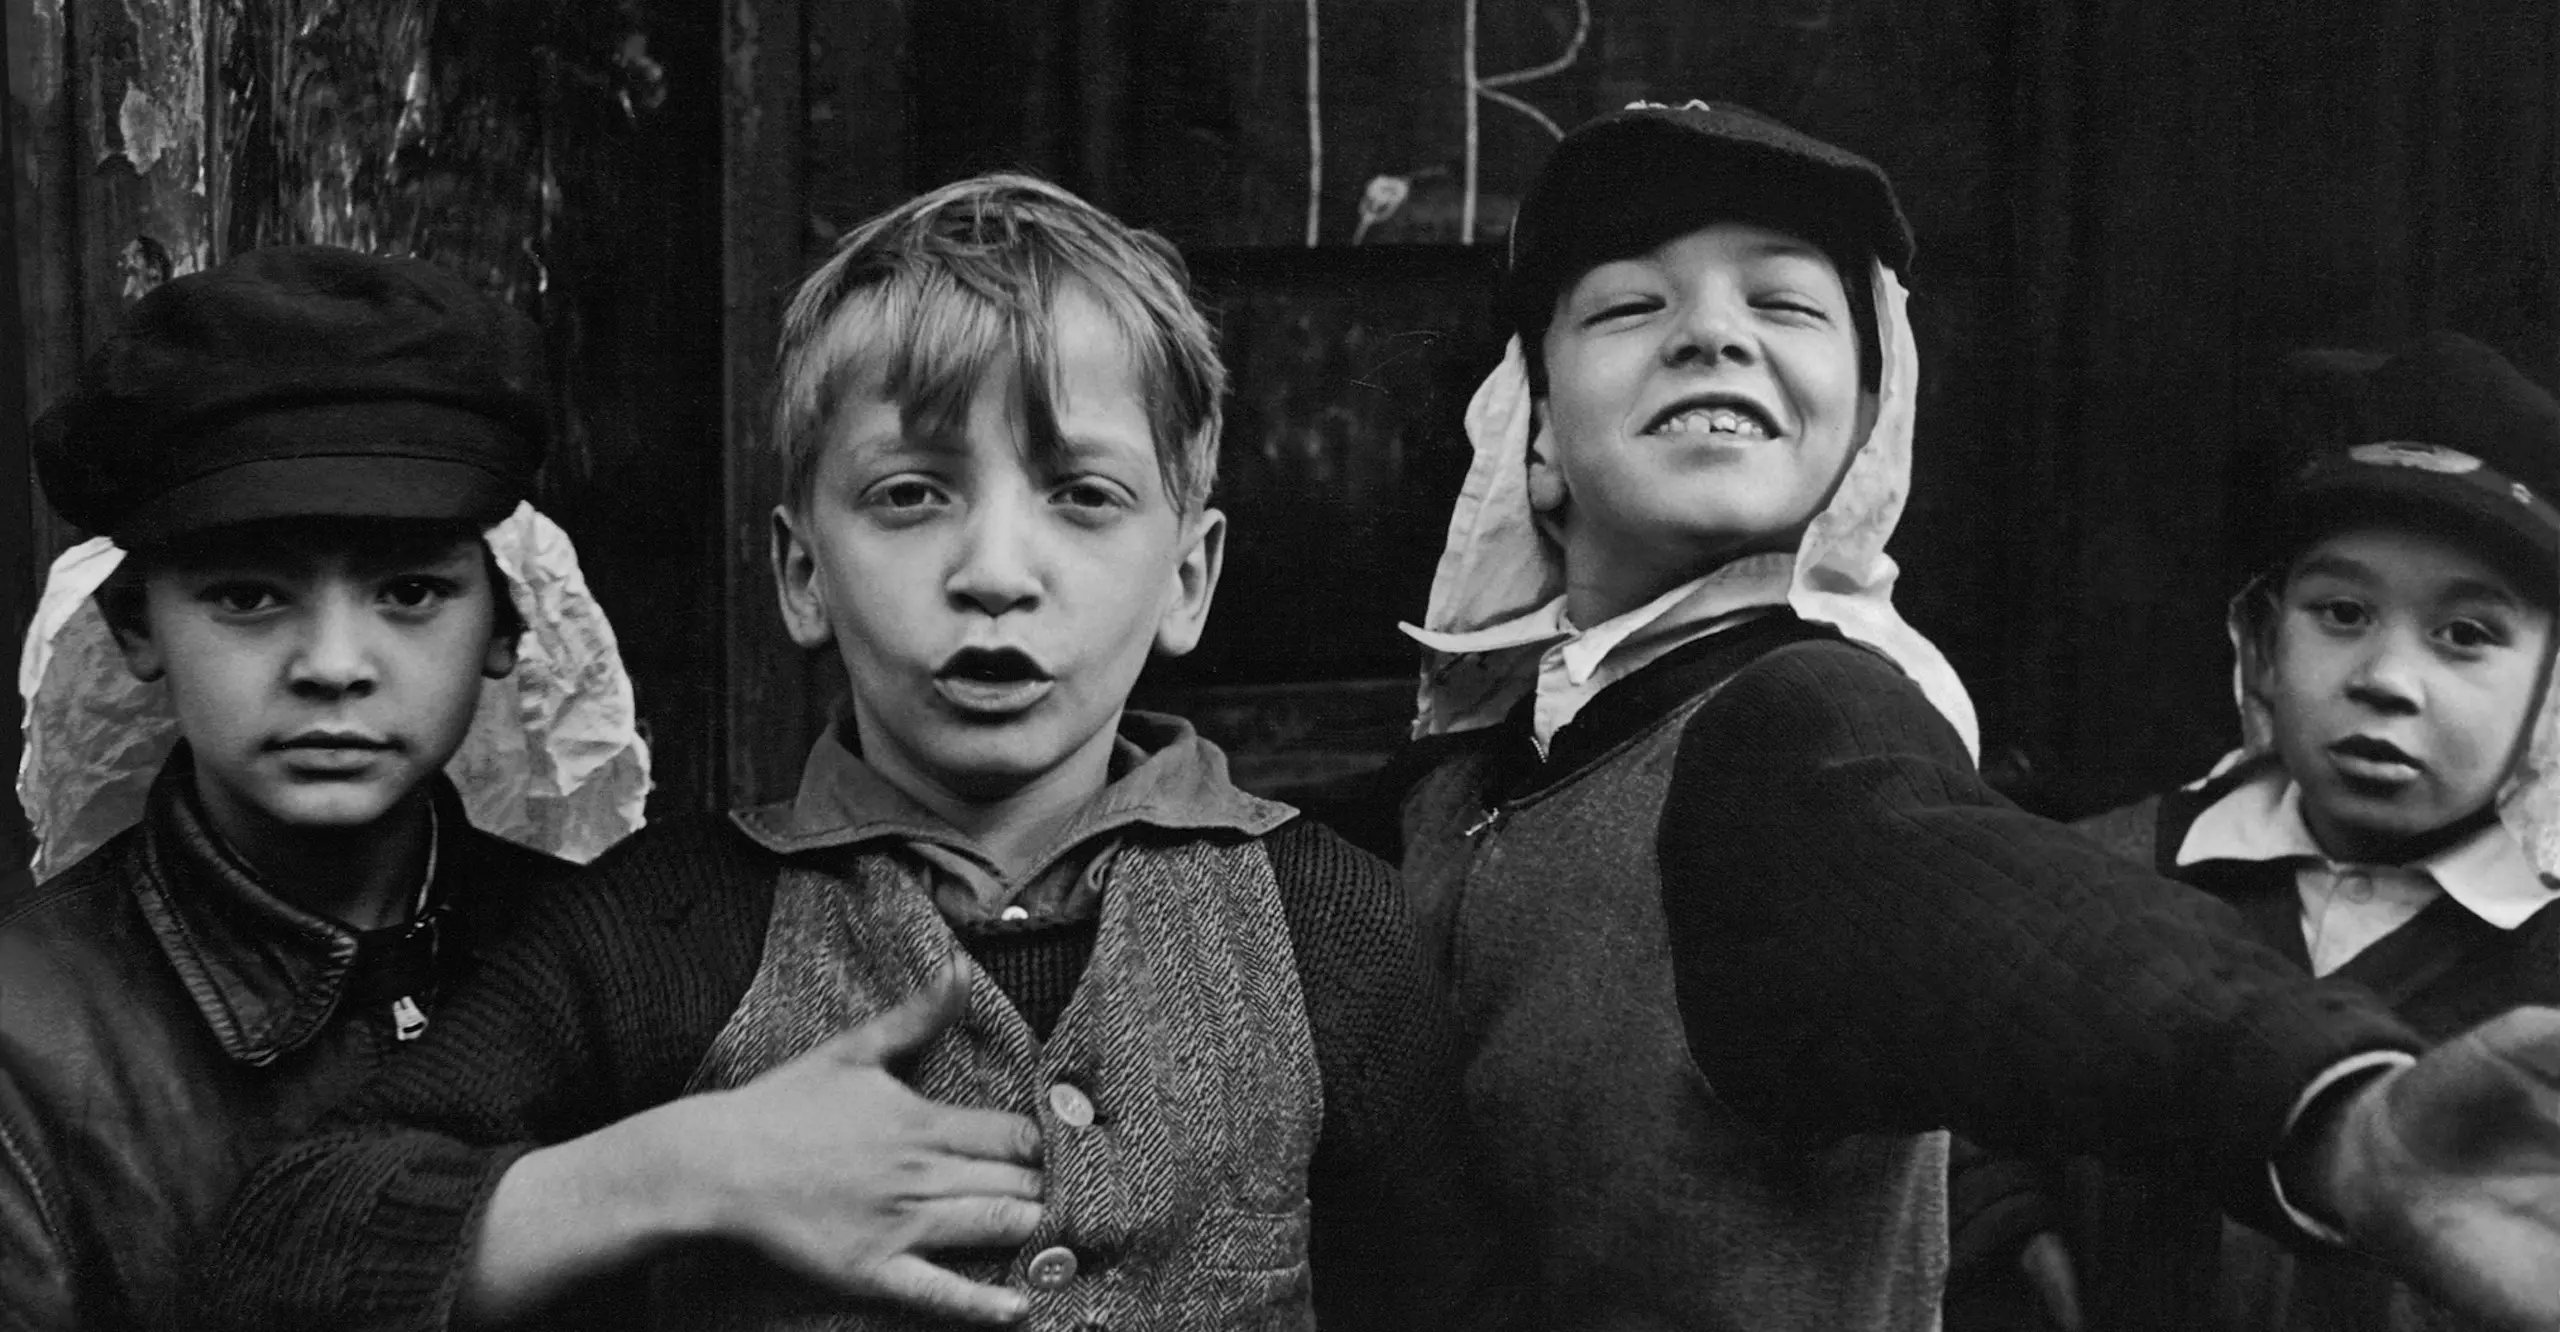 Black and white photograph showing head and shoulders of four boys aged about 8 years acting playfully for the camera.